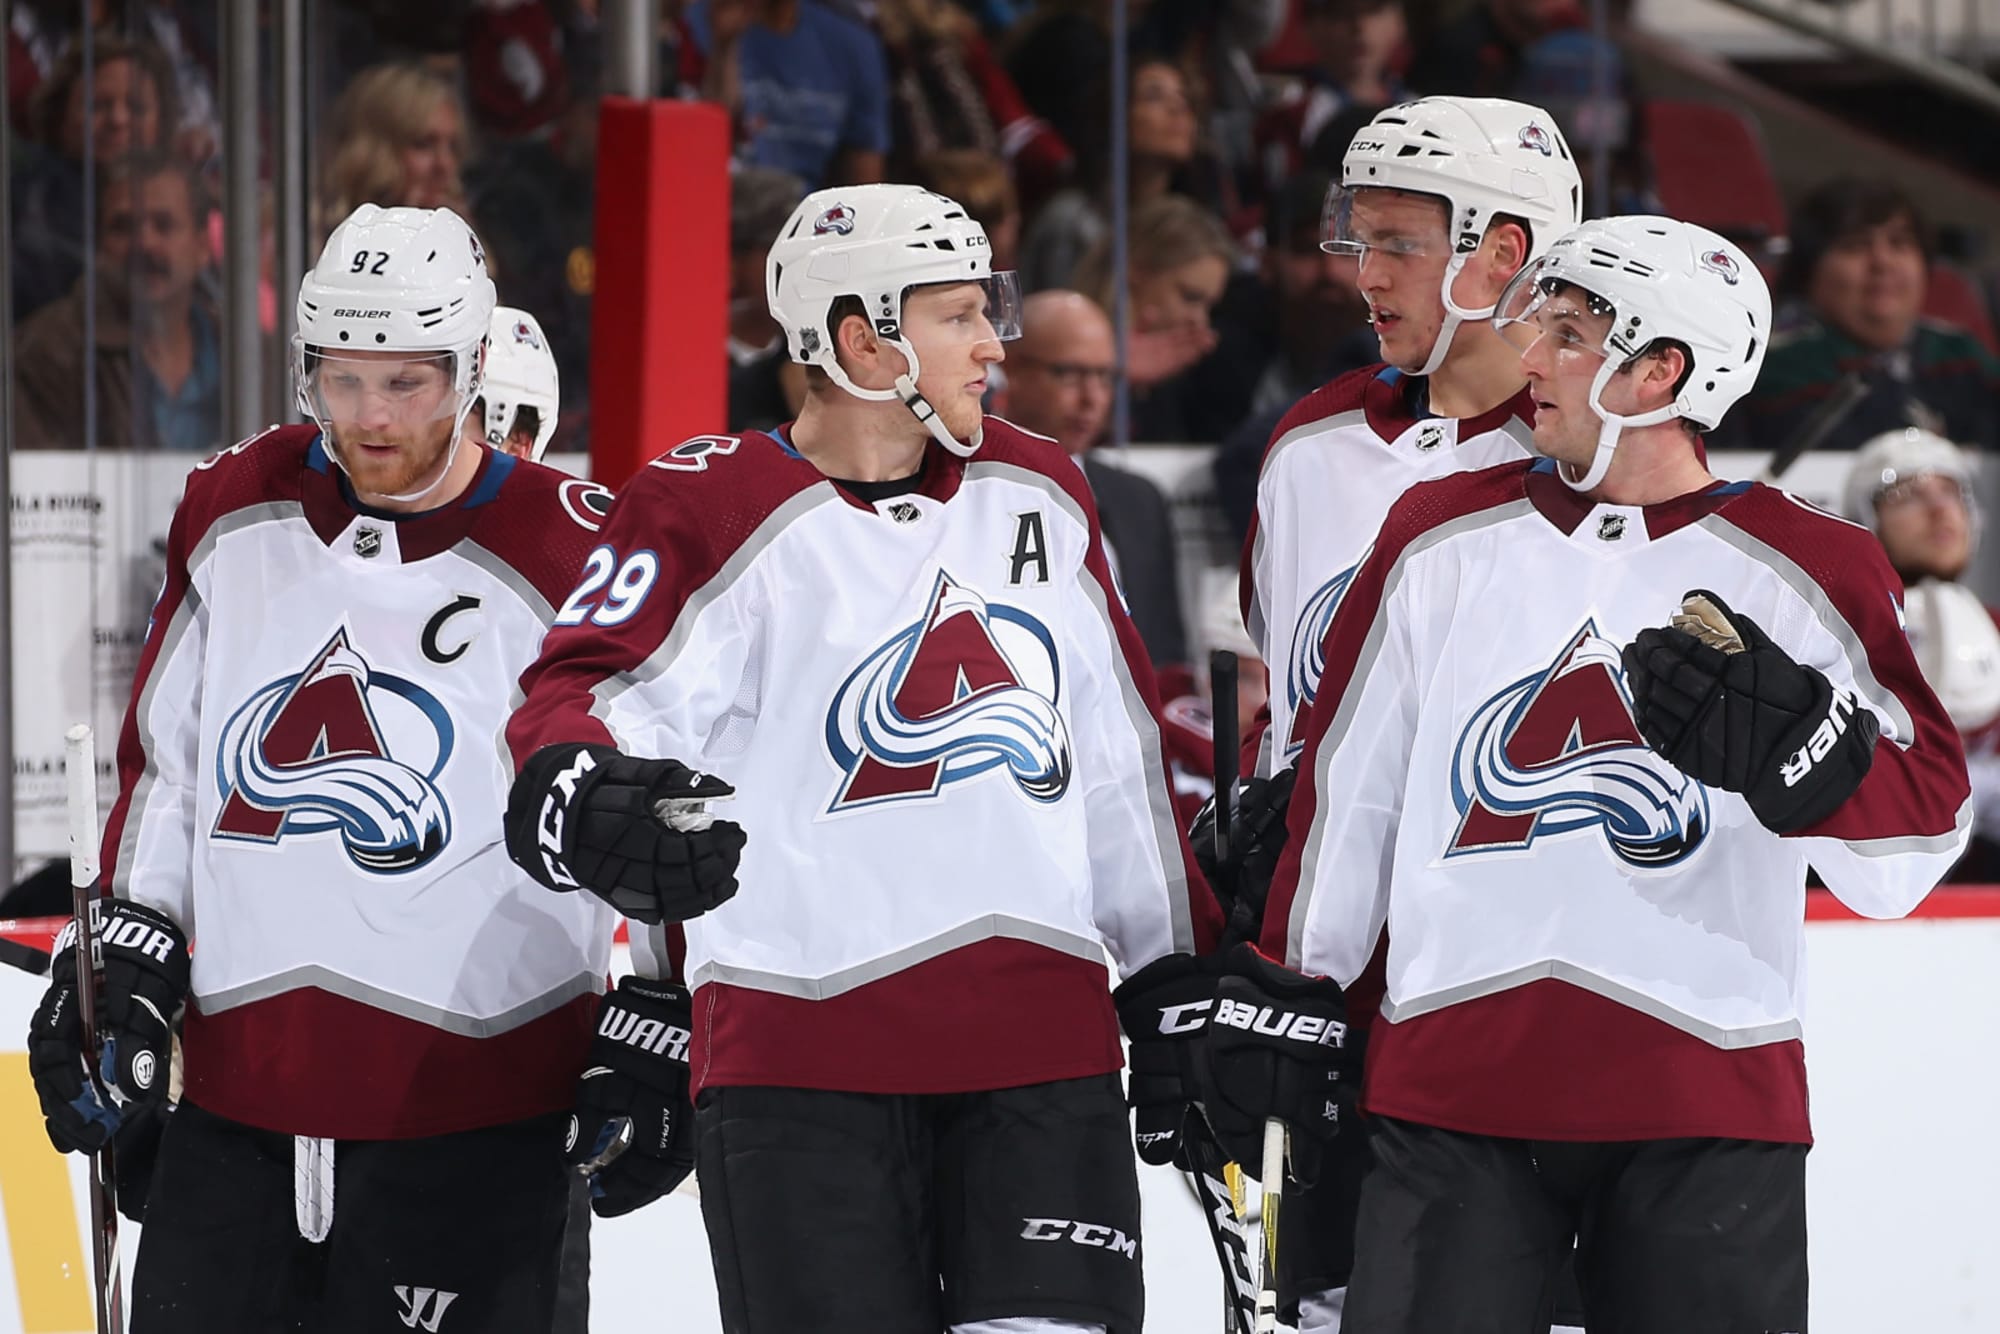 Colorado Avalanche Are The Players Ready For the Playoffs?